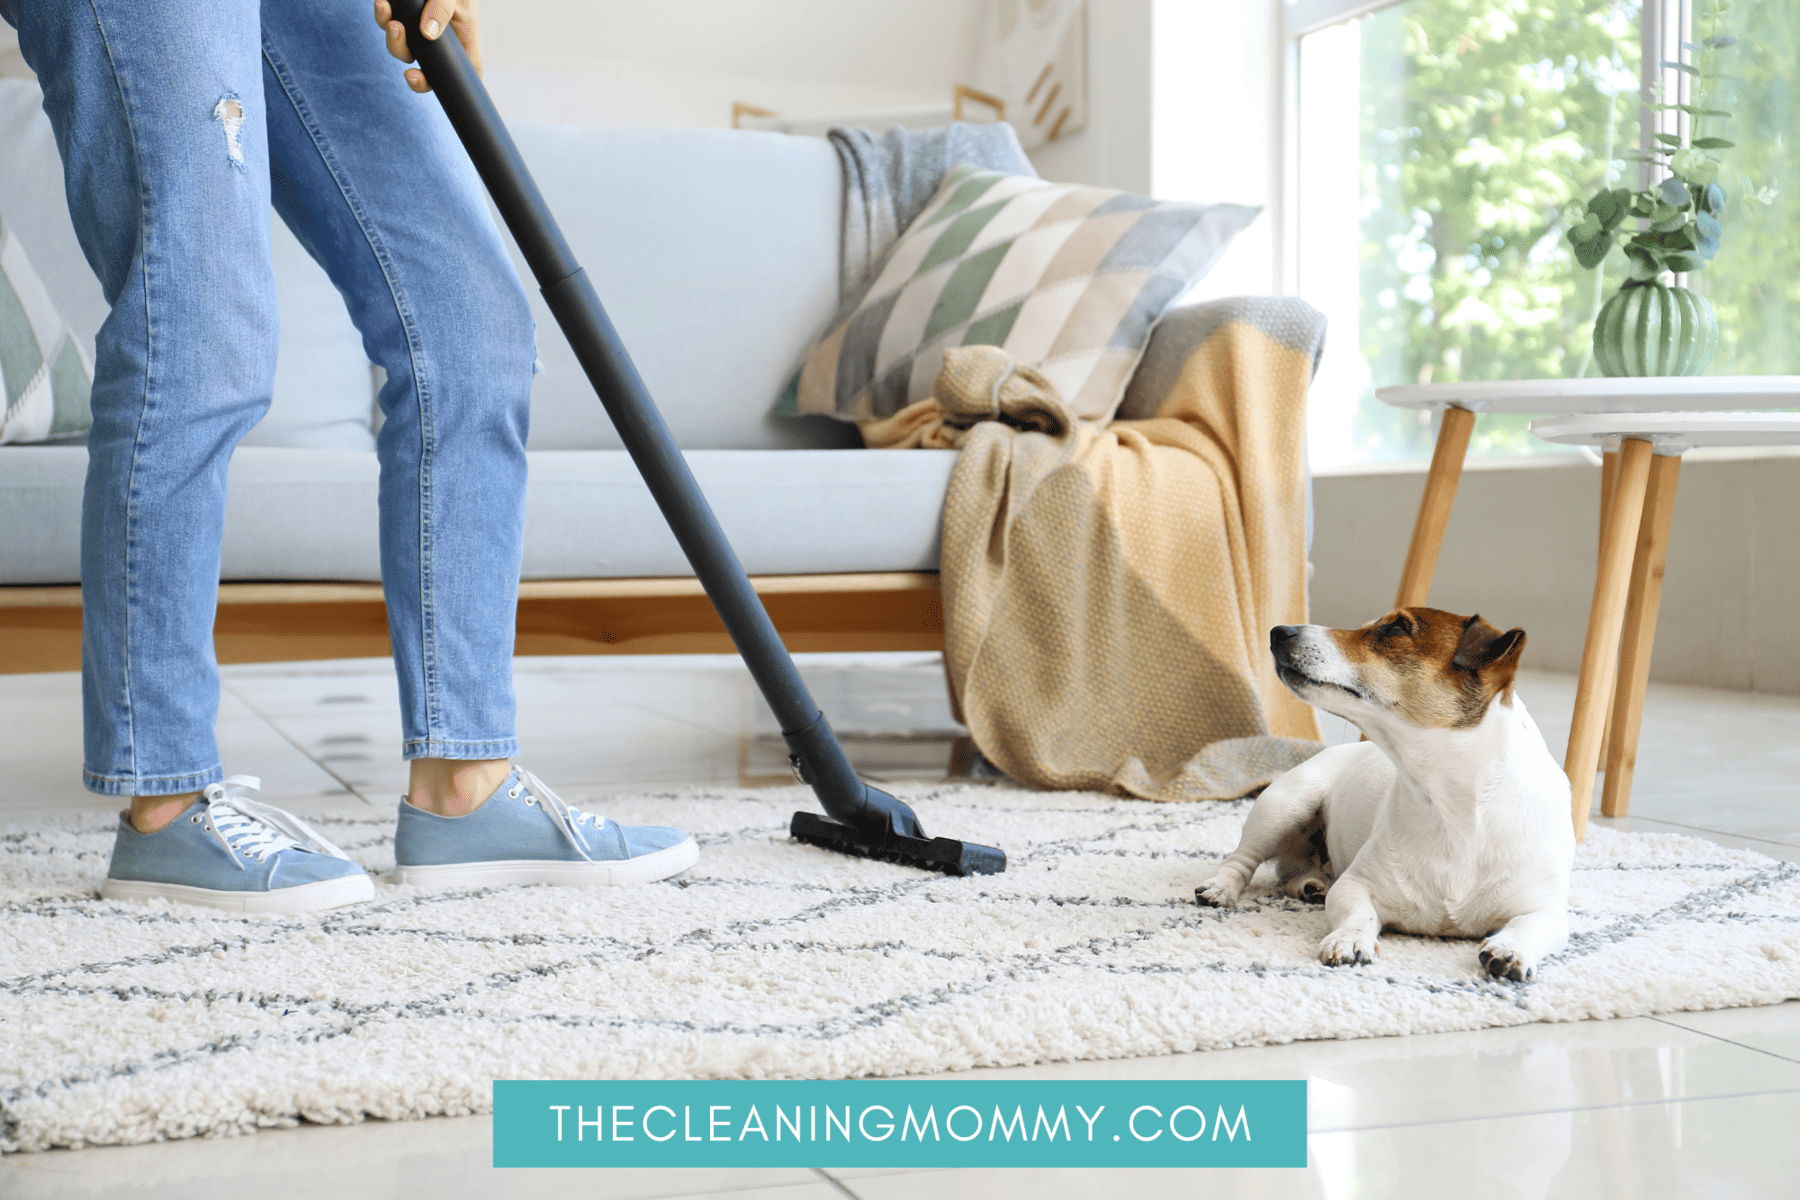 Woman cleaning area rug with dog sitting